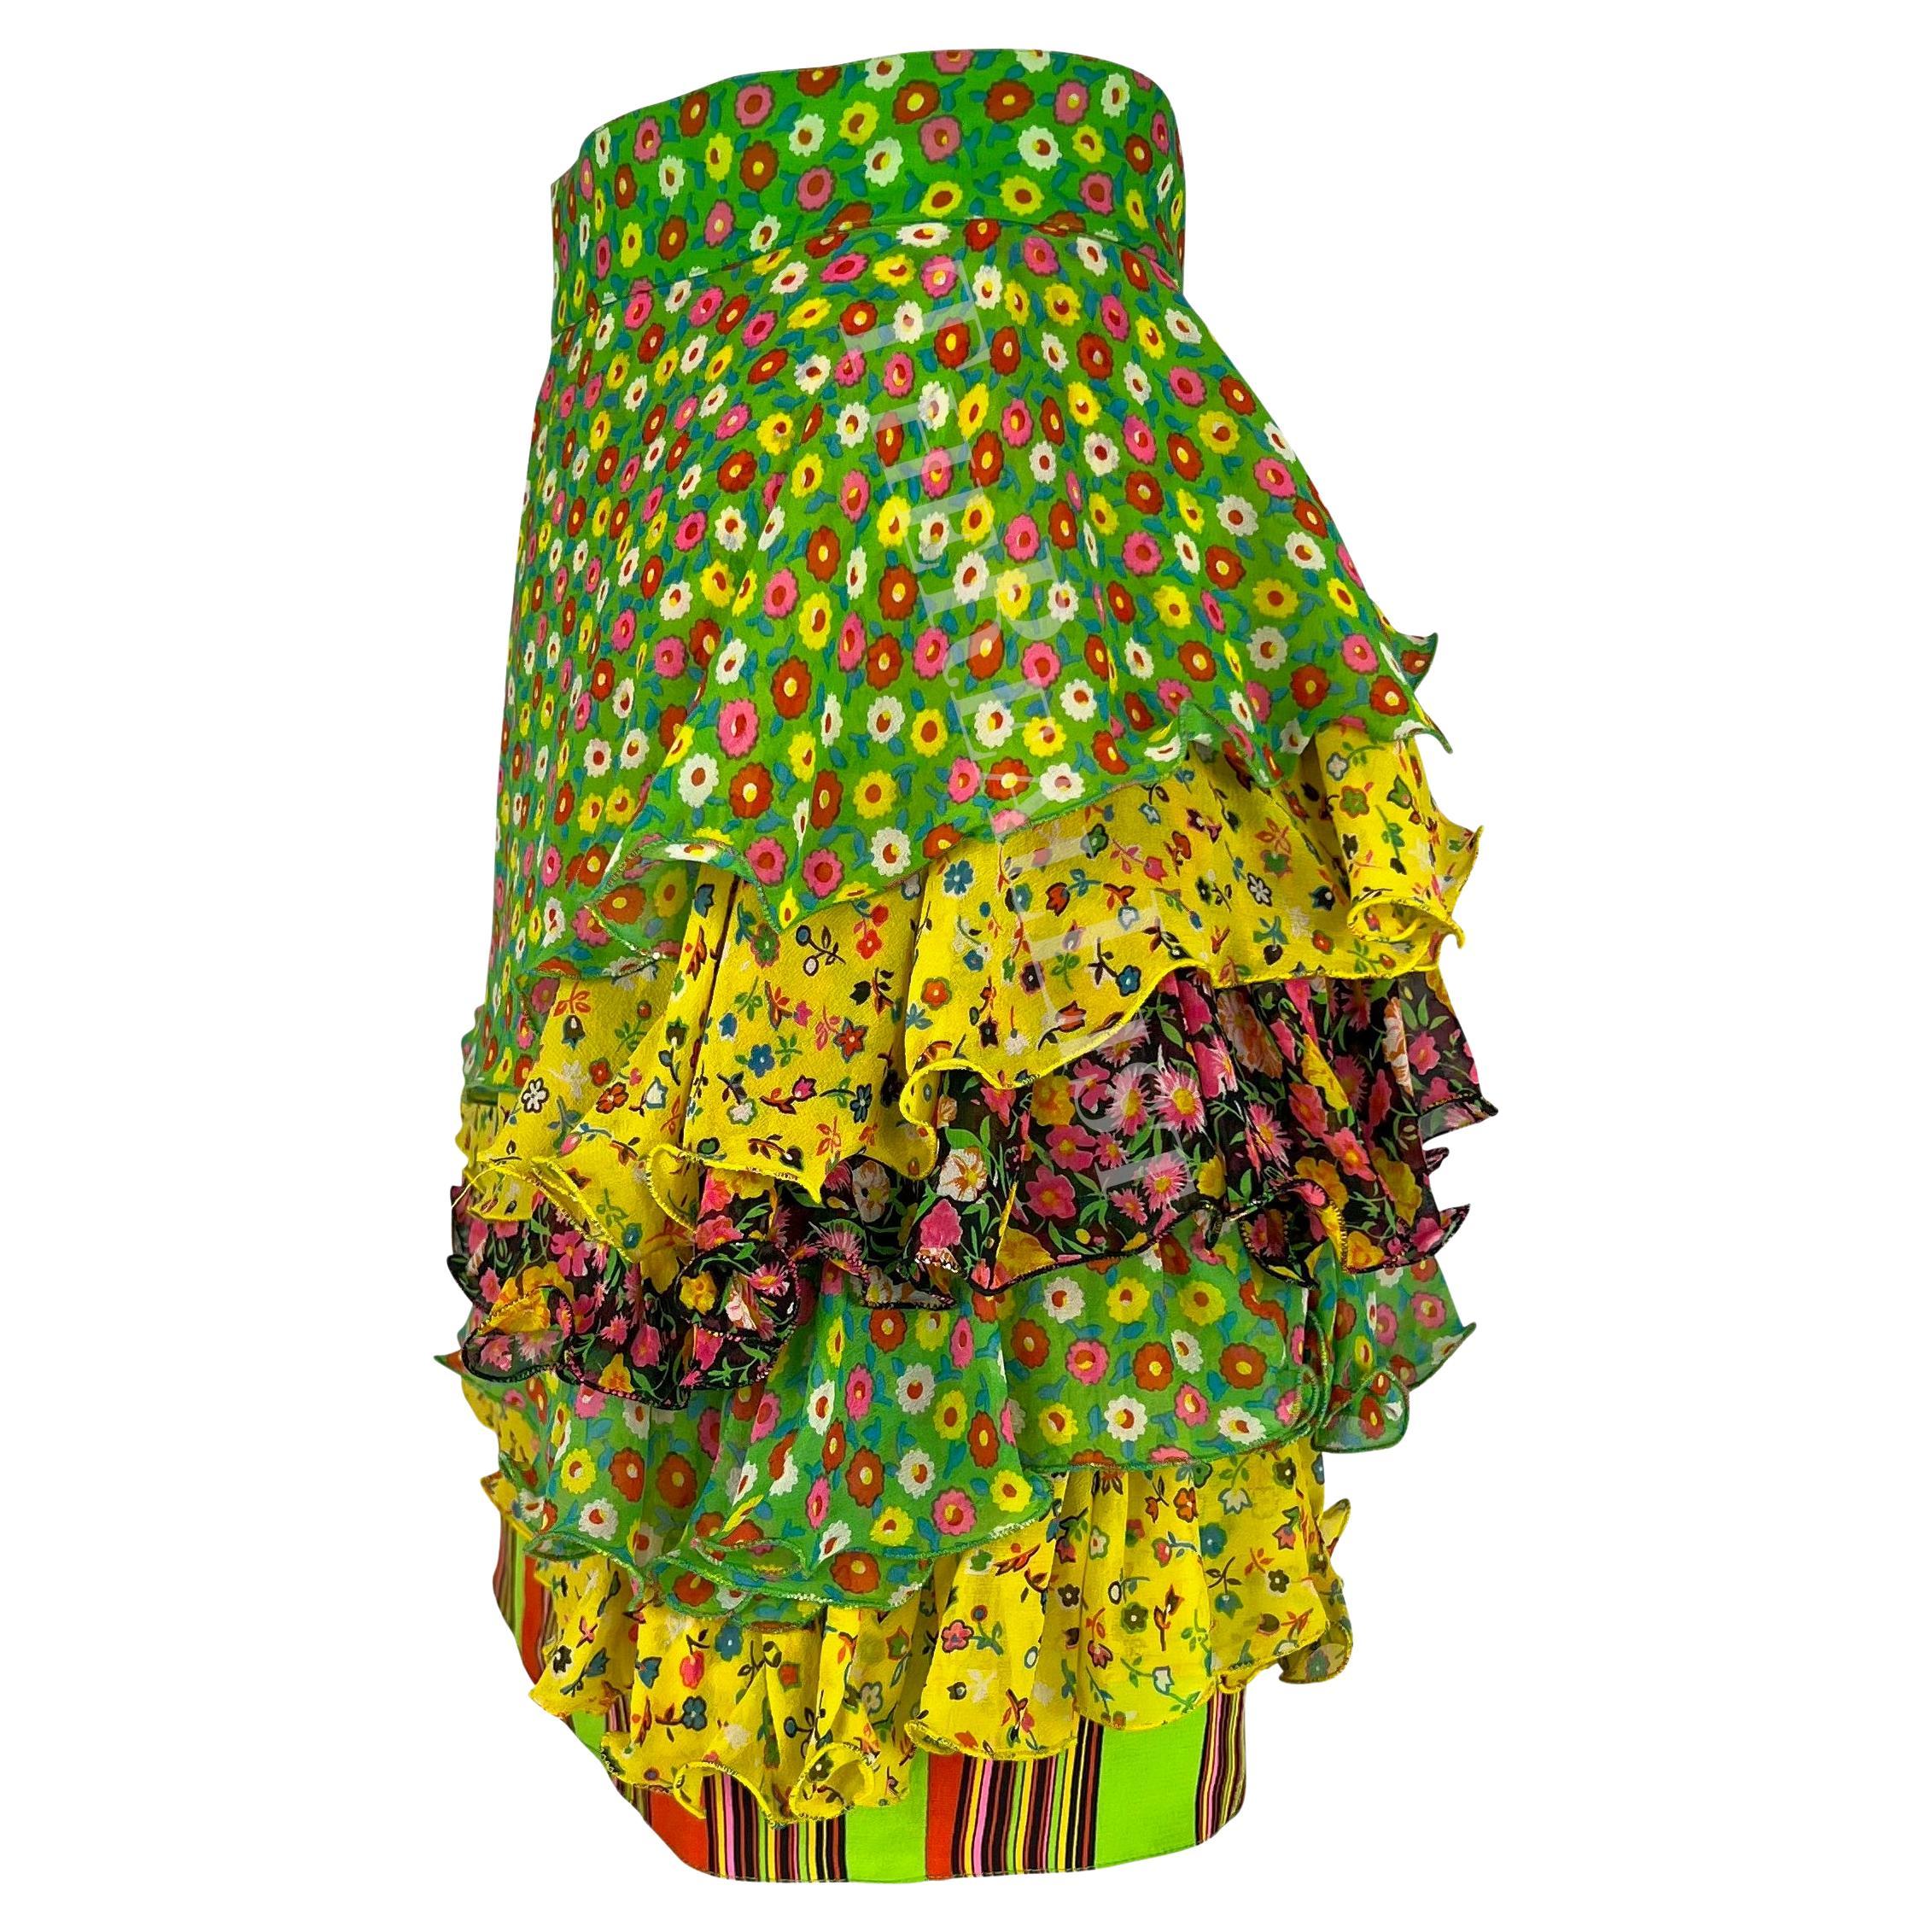 S/S 1993 Gianni Versace Tiered Floral Multicolor Runway Mini Skirt In Excellent Condition For Sale In West Hollywood, CA